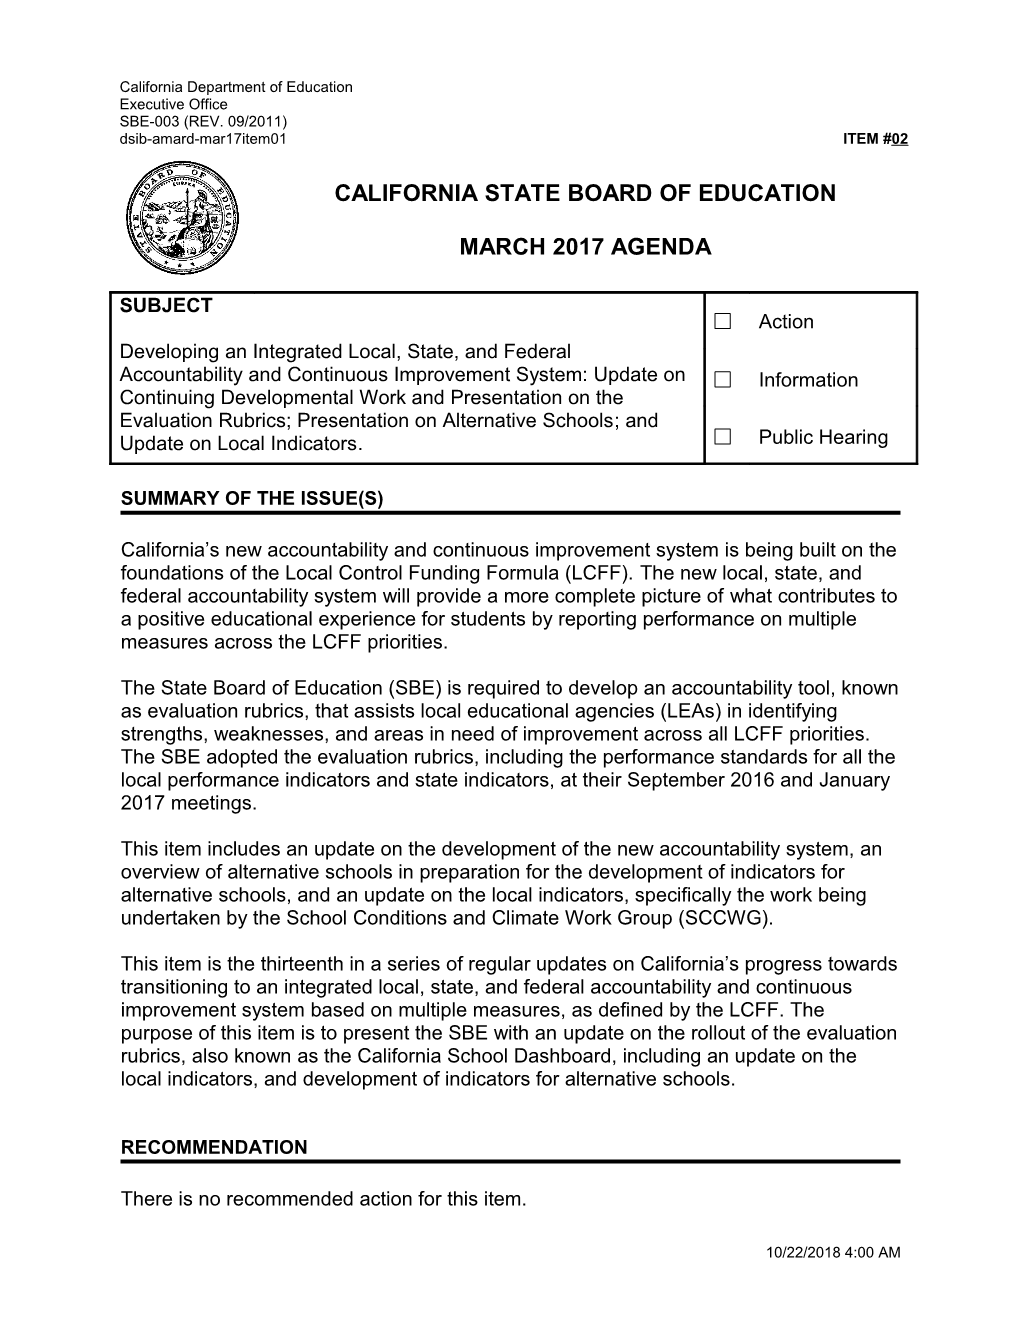 March 2017 Agenda Item 02 - Meeting Agendas (CA State Board of Education)